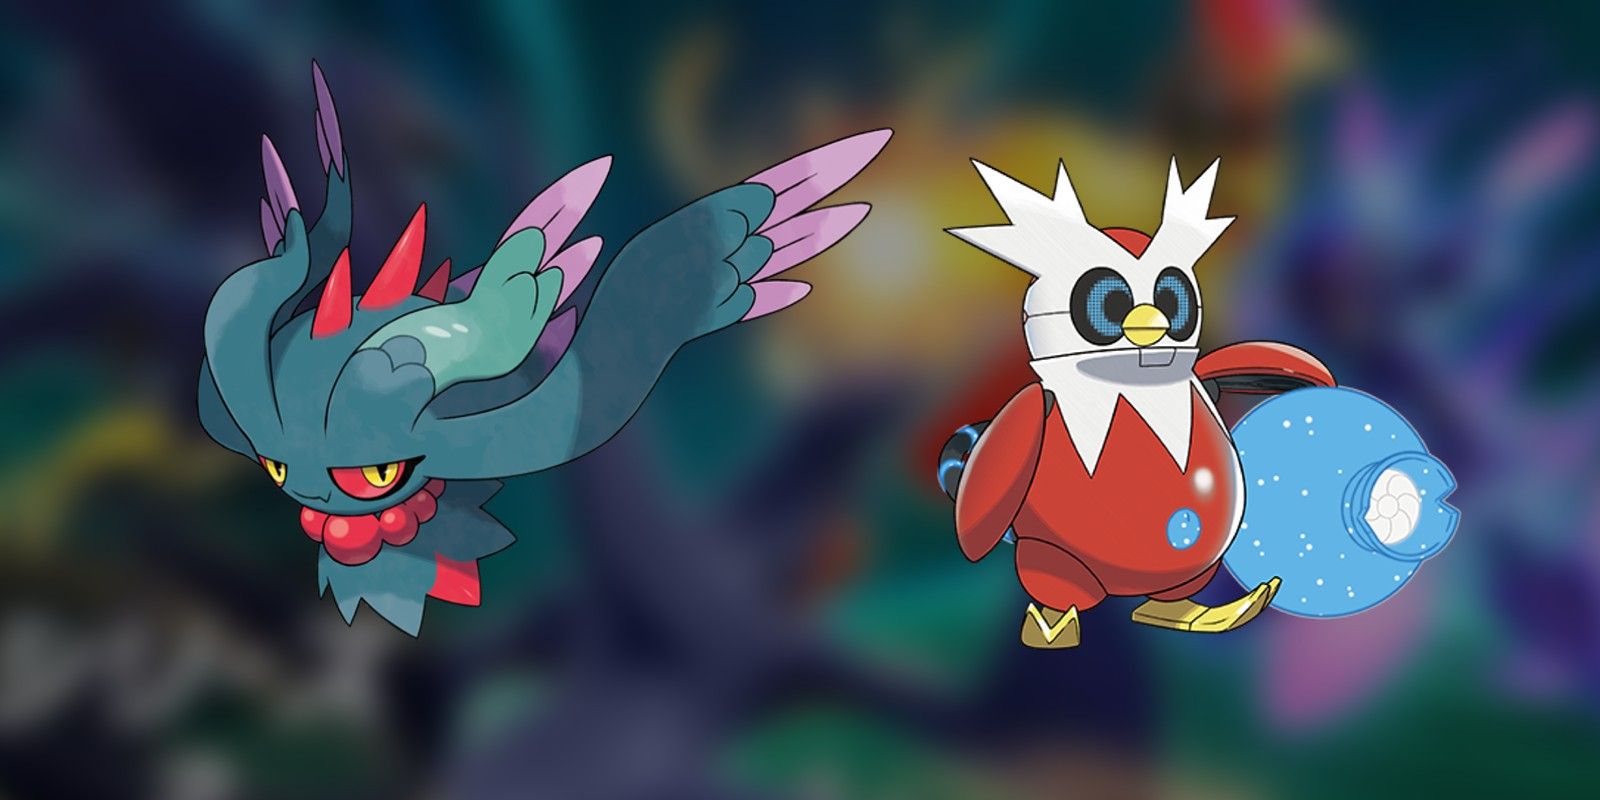 Flutter Mane and Iron Bundle are undefeated in Pokemon Scarlet and Violet VGC